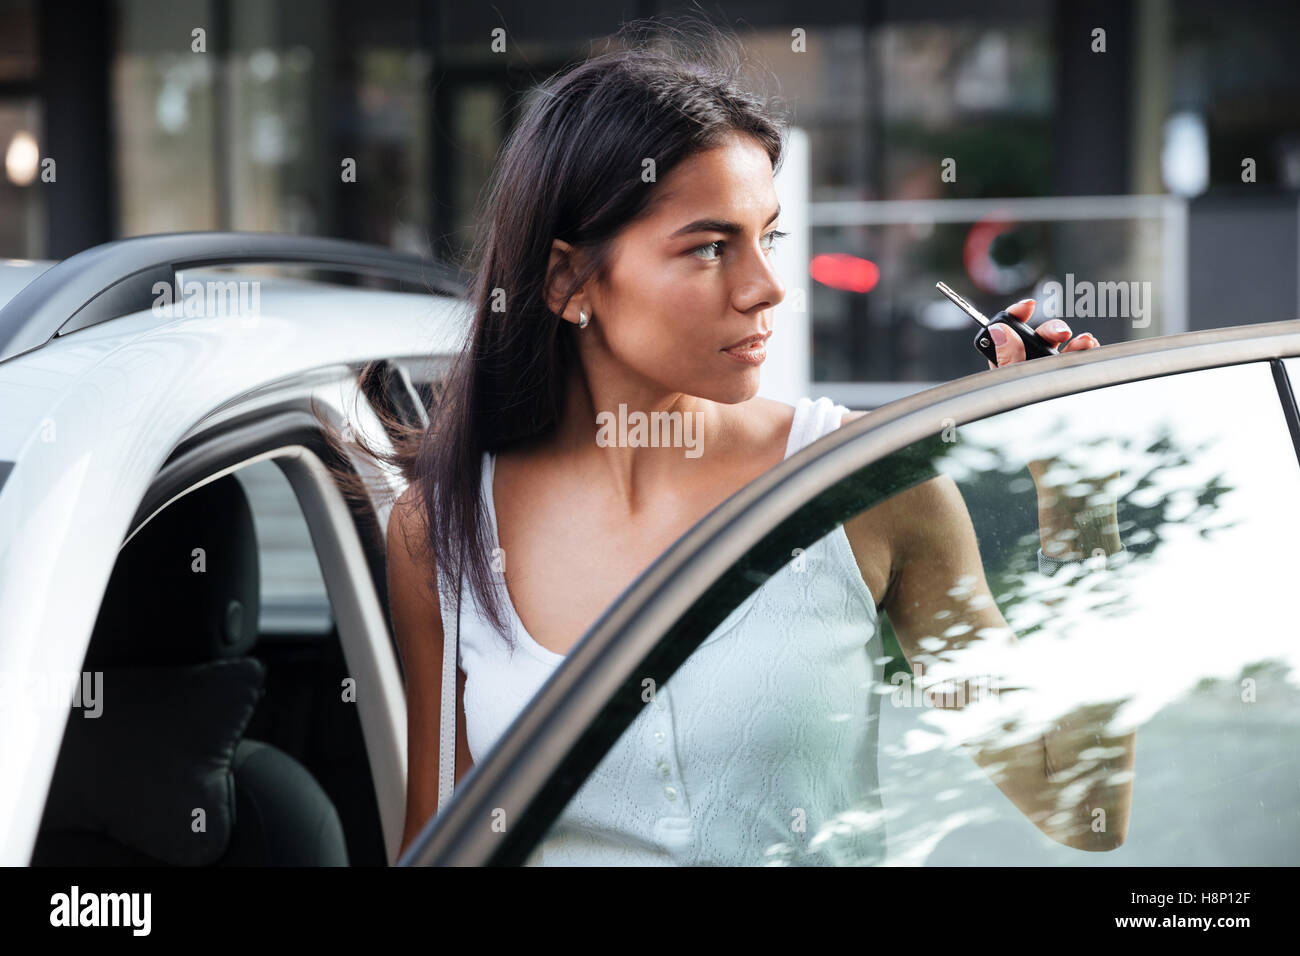 Attractive young woman standing near opened car outdoors Stock Photo